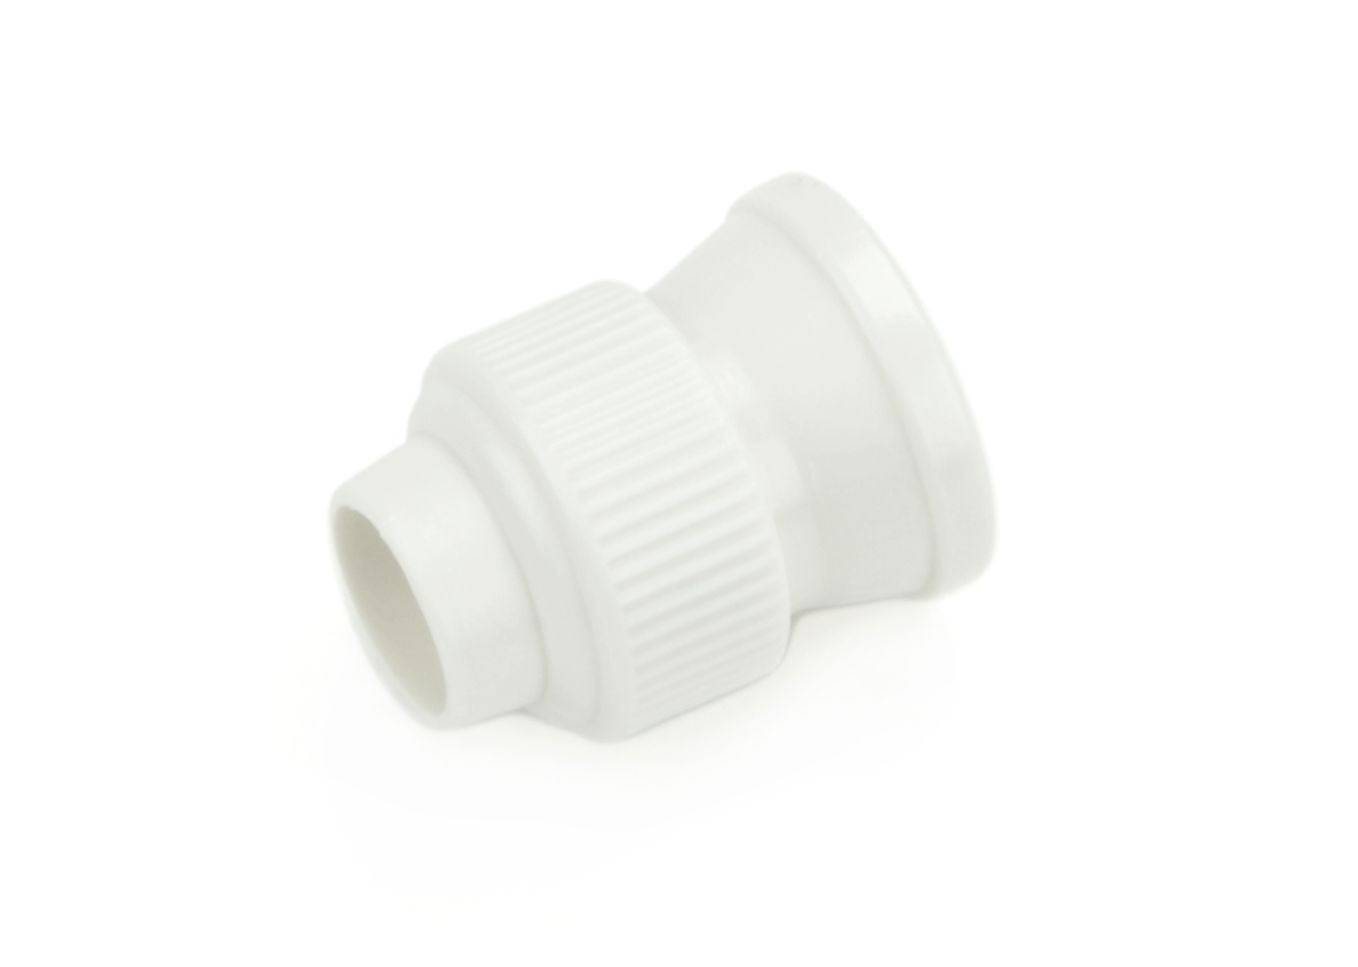 Nozzle adapter small 1mm